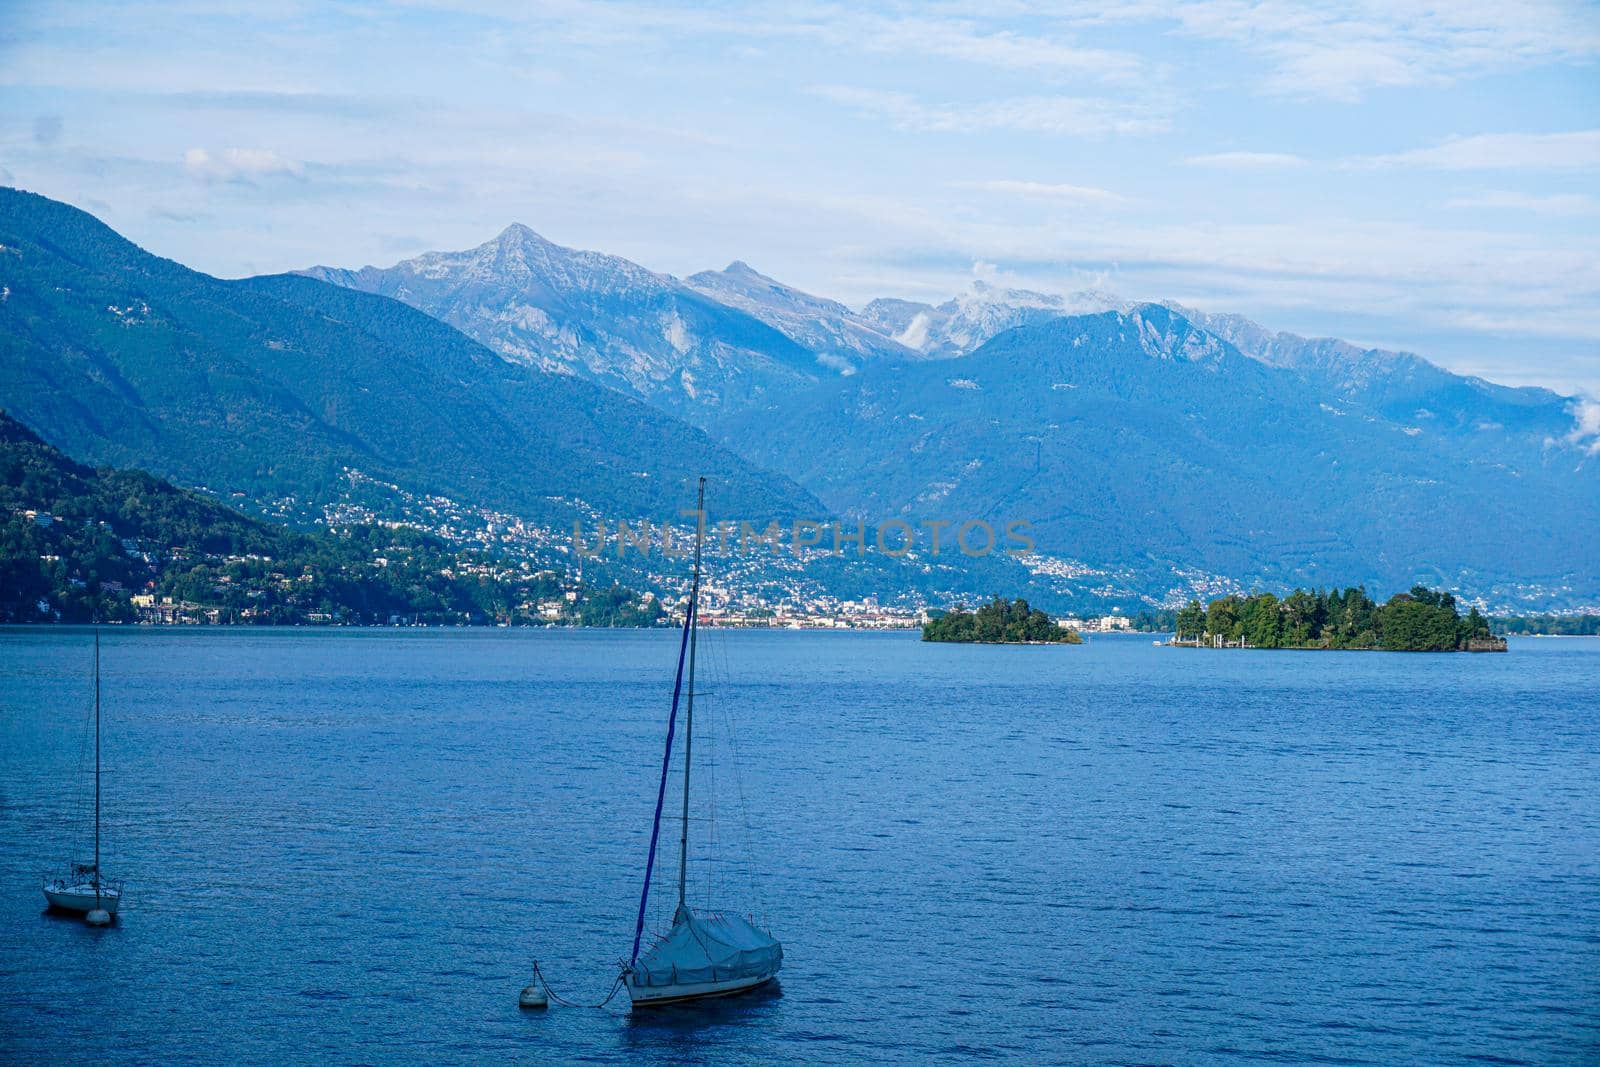 Sail boats in front of impressing mountain range on the Lago Maggiore lake in the canton Ticino, Switzerland